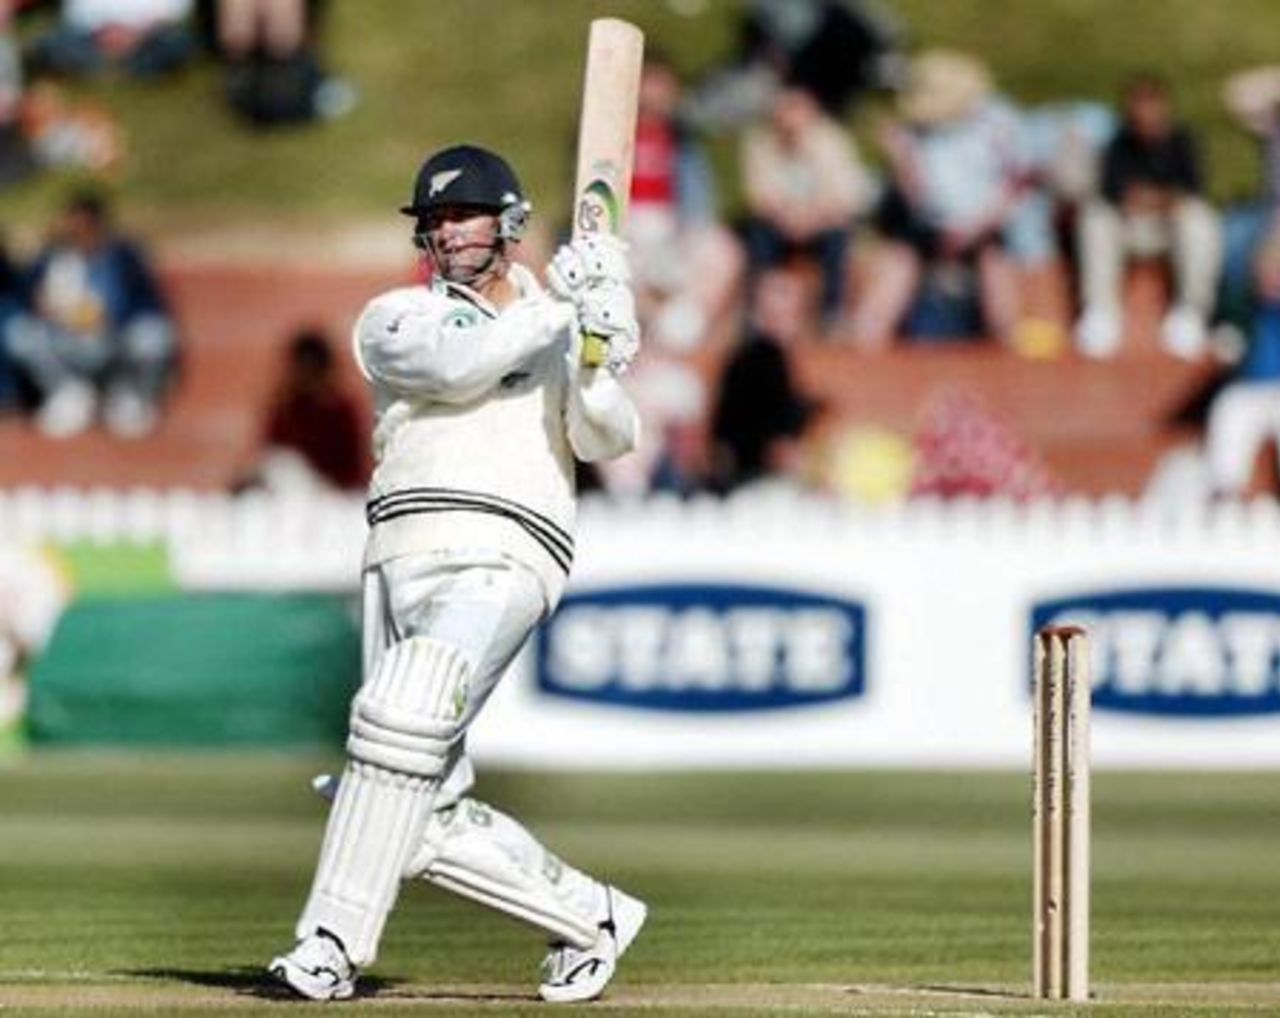 New Zealand batsman Nathan Astle pulls a delivery from Indian bowler Ajit Agarkar to the midwicket boundary for four during his first innings of 41. 1st Test: New Zealand v India at Basin Reserve, Wellington, 12-16 December 2002 (13 December 2002).